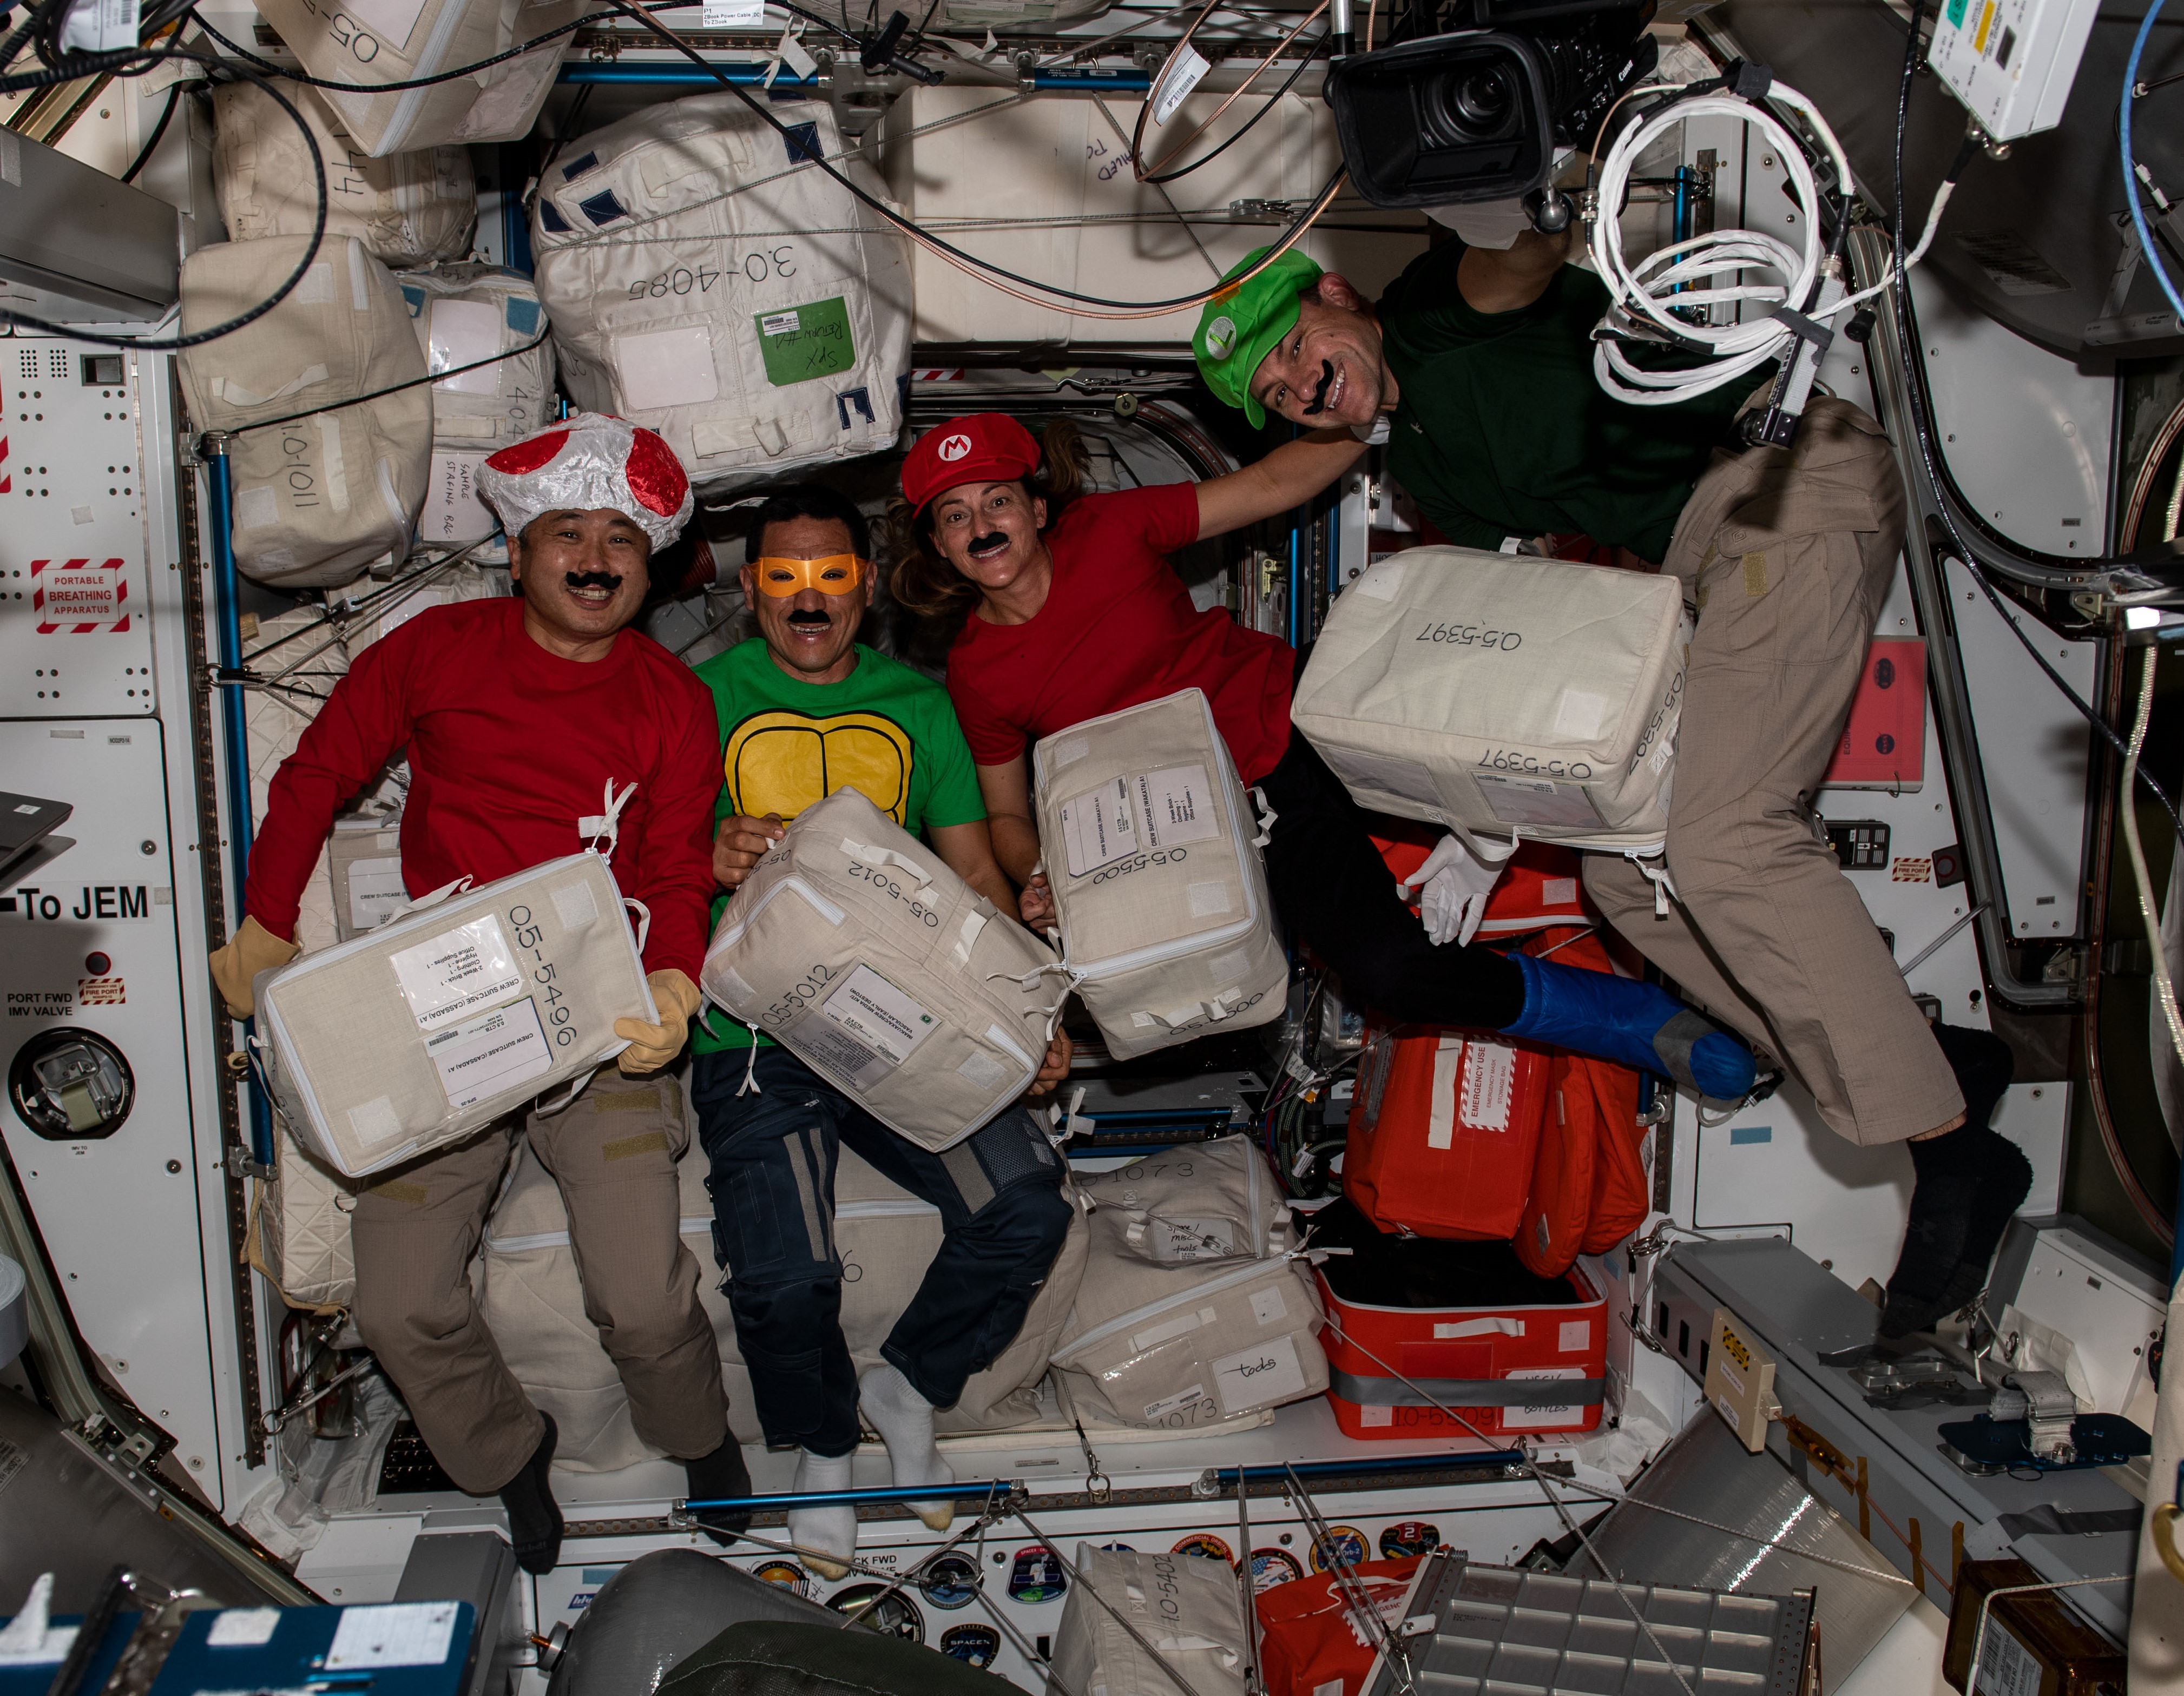 In 2022, Expedition 68 astronauts Koichi Wakata of the Japan Aerospace Exploration Agency, left, and NASA astronauts Francisco “Frank” C. Rubio, Nicole A. Mann, and Josh A. Cassada dressed as popular video game and cartoon characters, using stowage containers in their Halloween costumes and holding improvised trick-or-treat bags